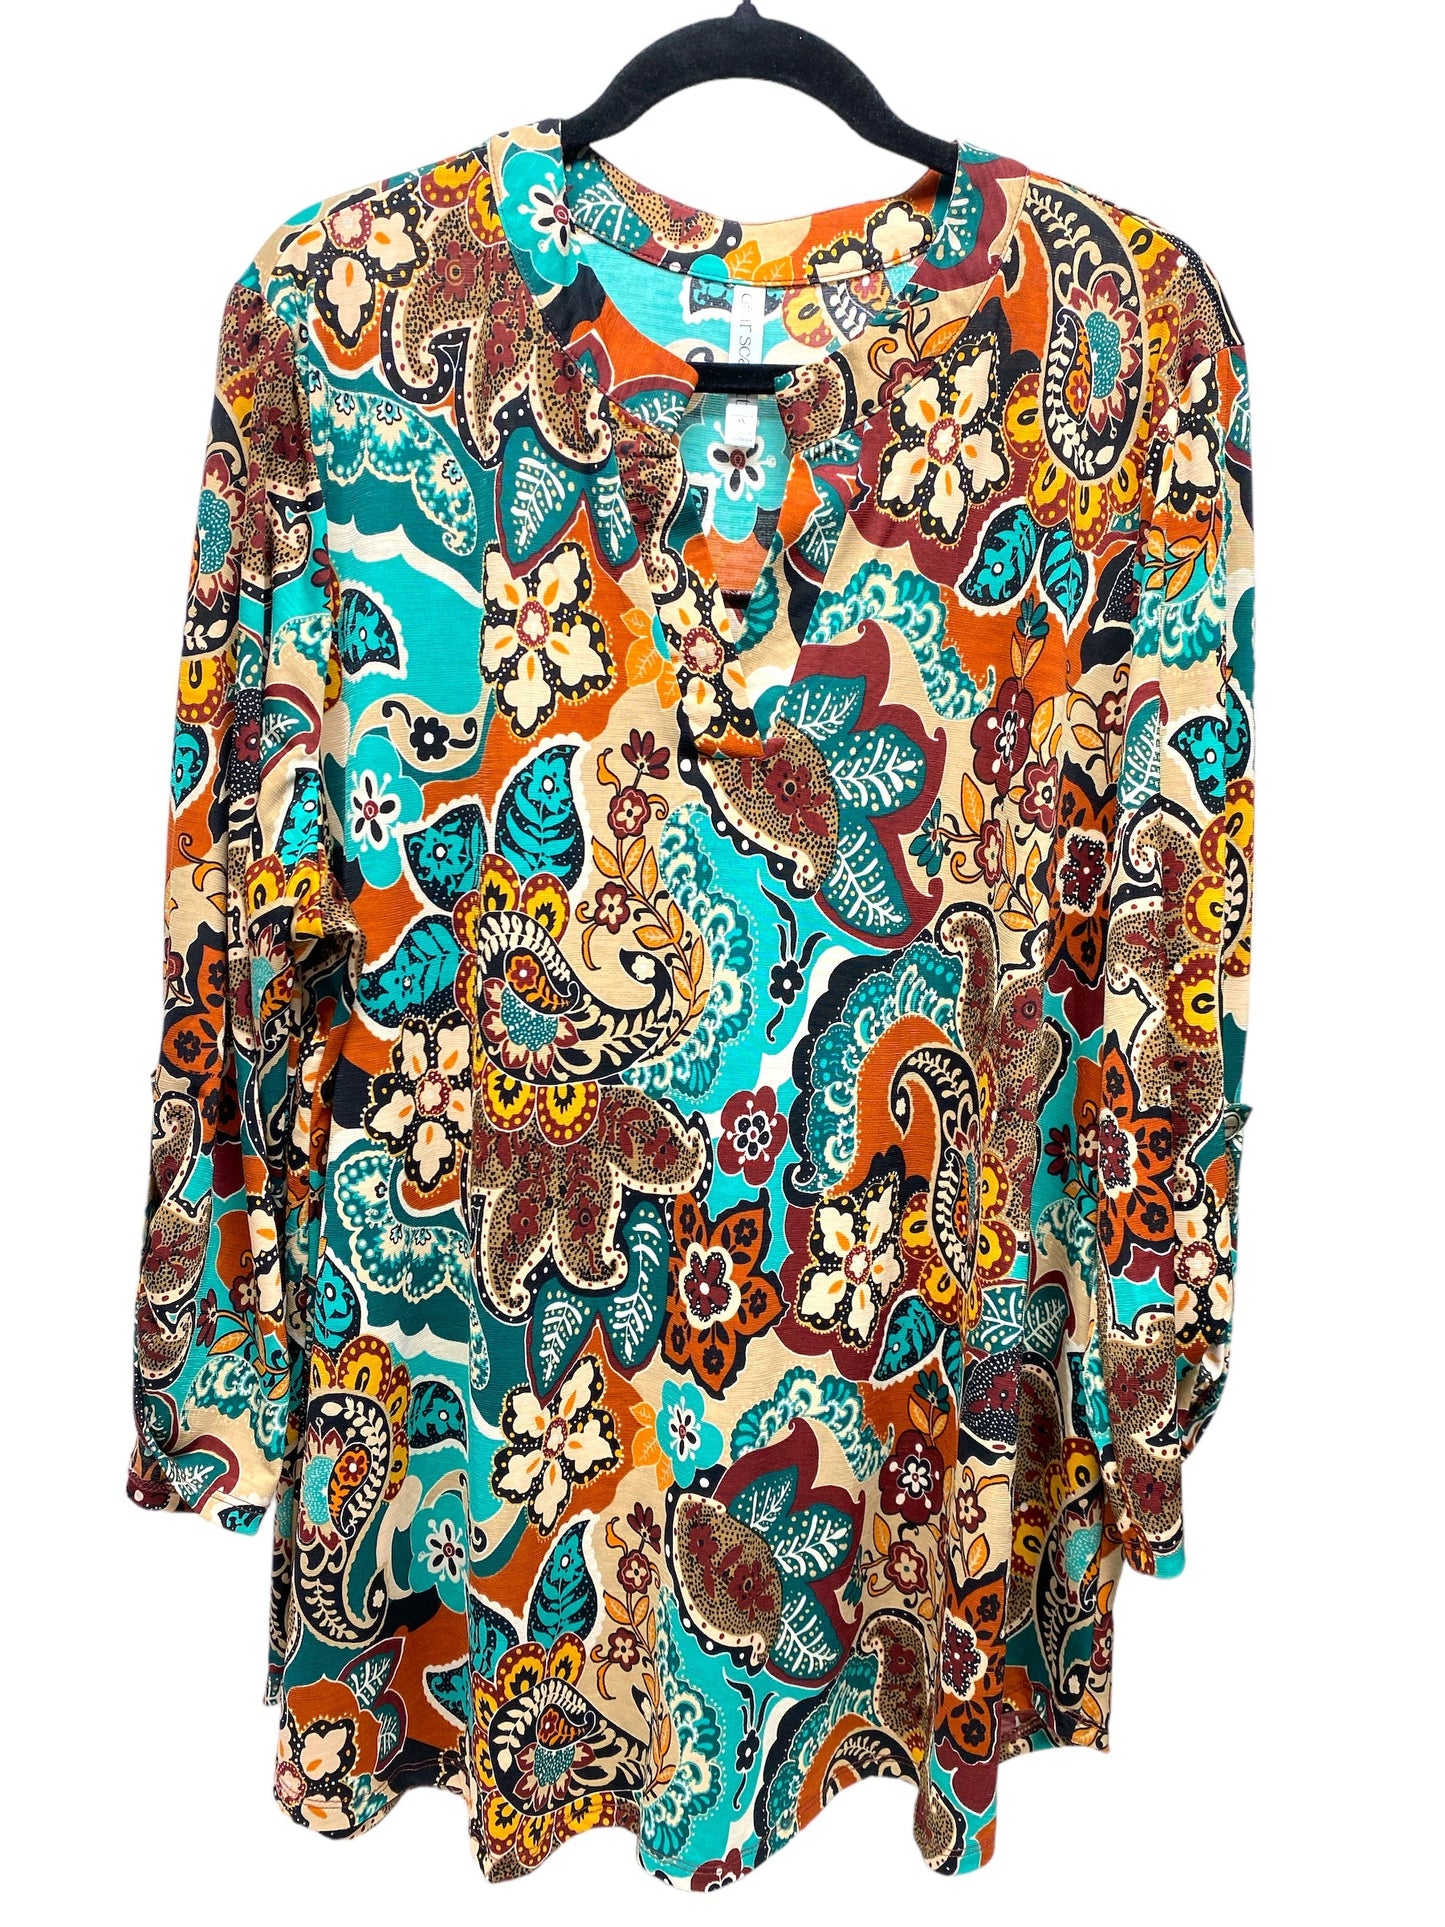 Paisley Print Top 3/4 Sleeve Clothes Mentor, Size 3x